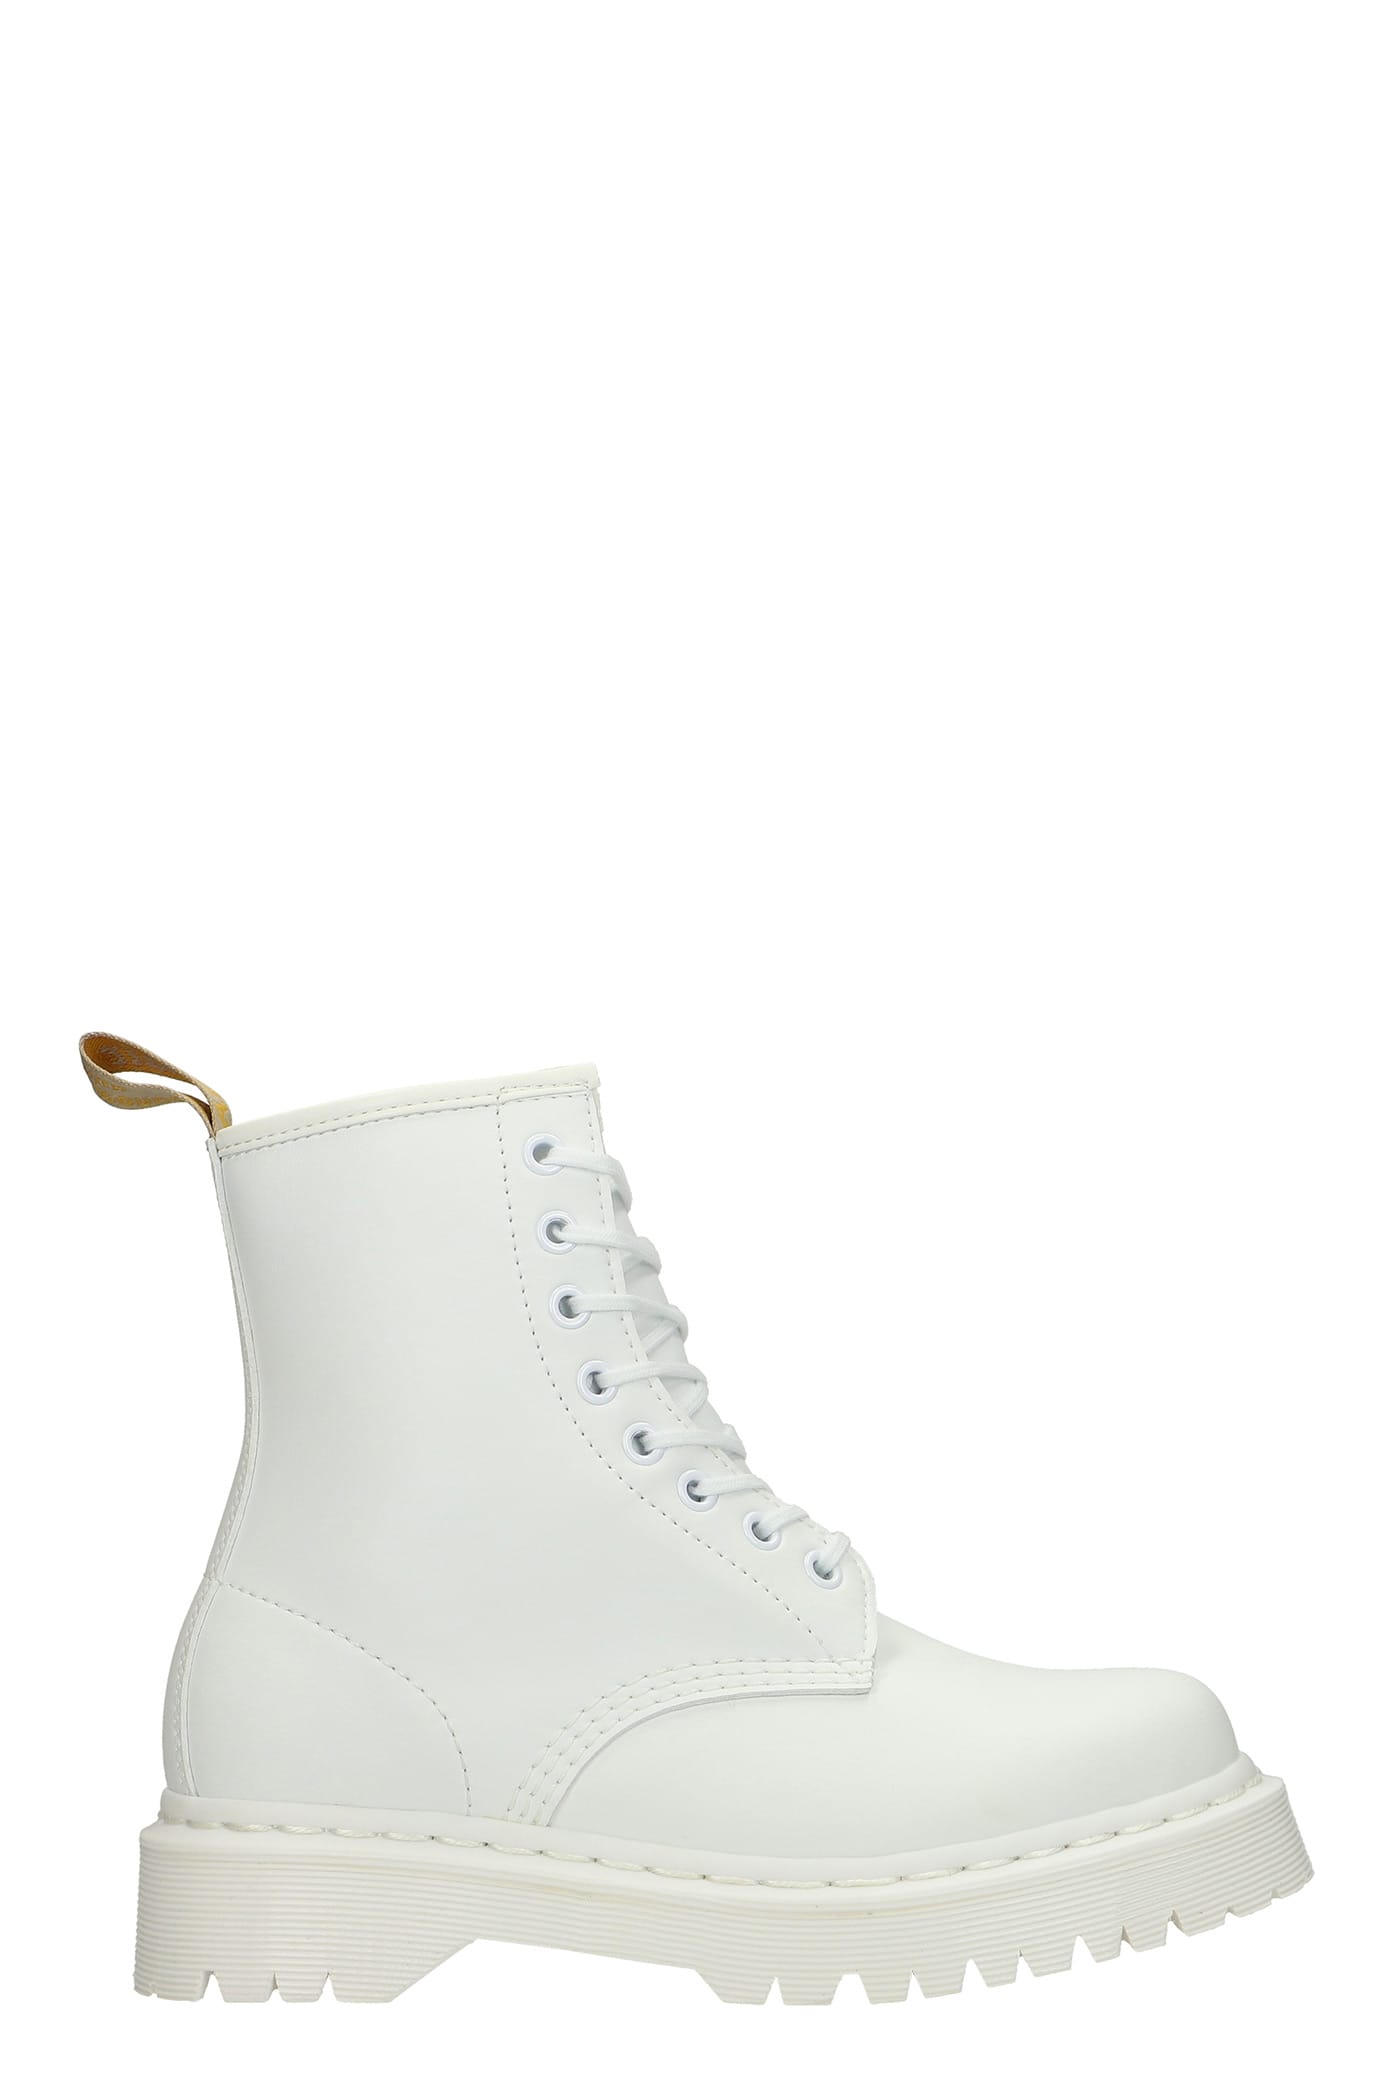 Dr. Martens Vegan 1460 Combat Boots In White Leather